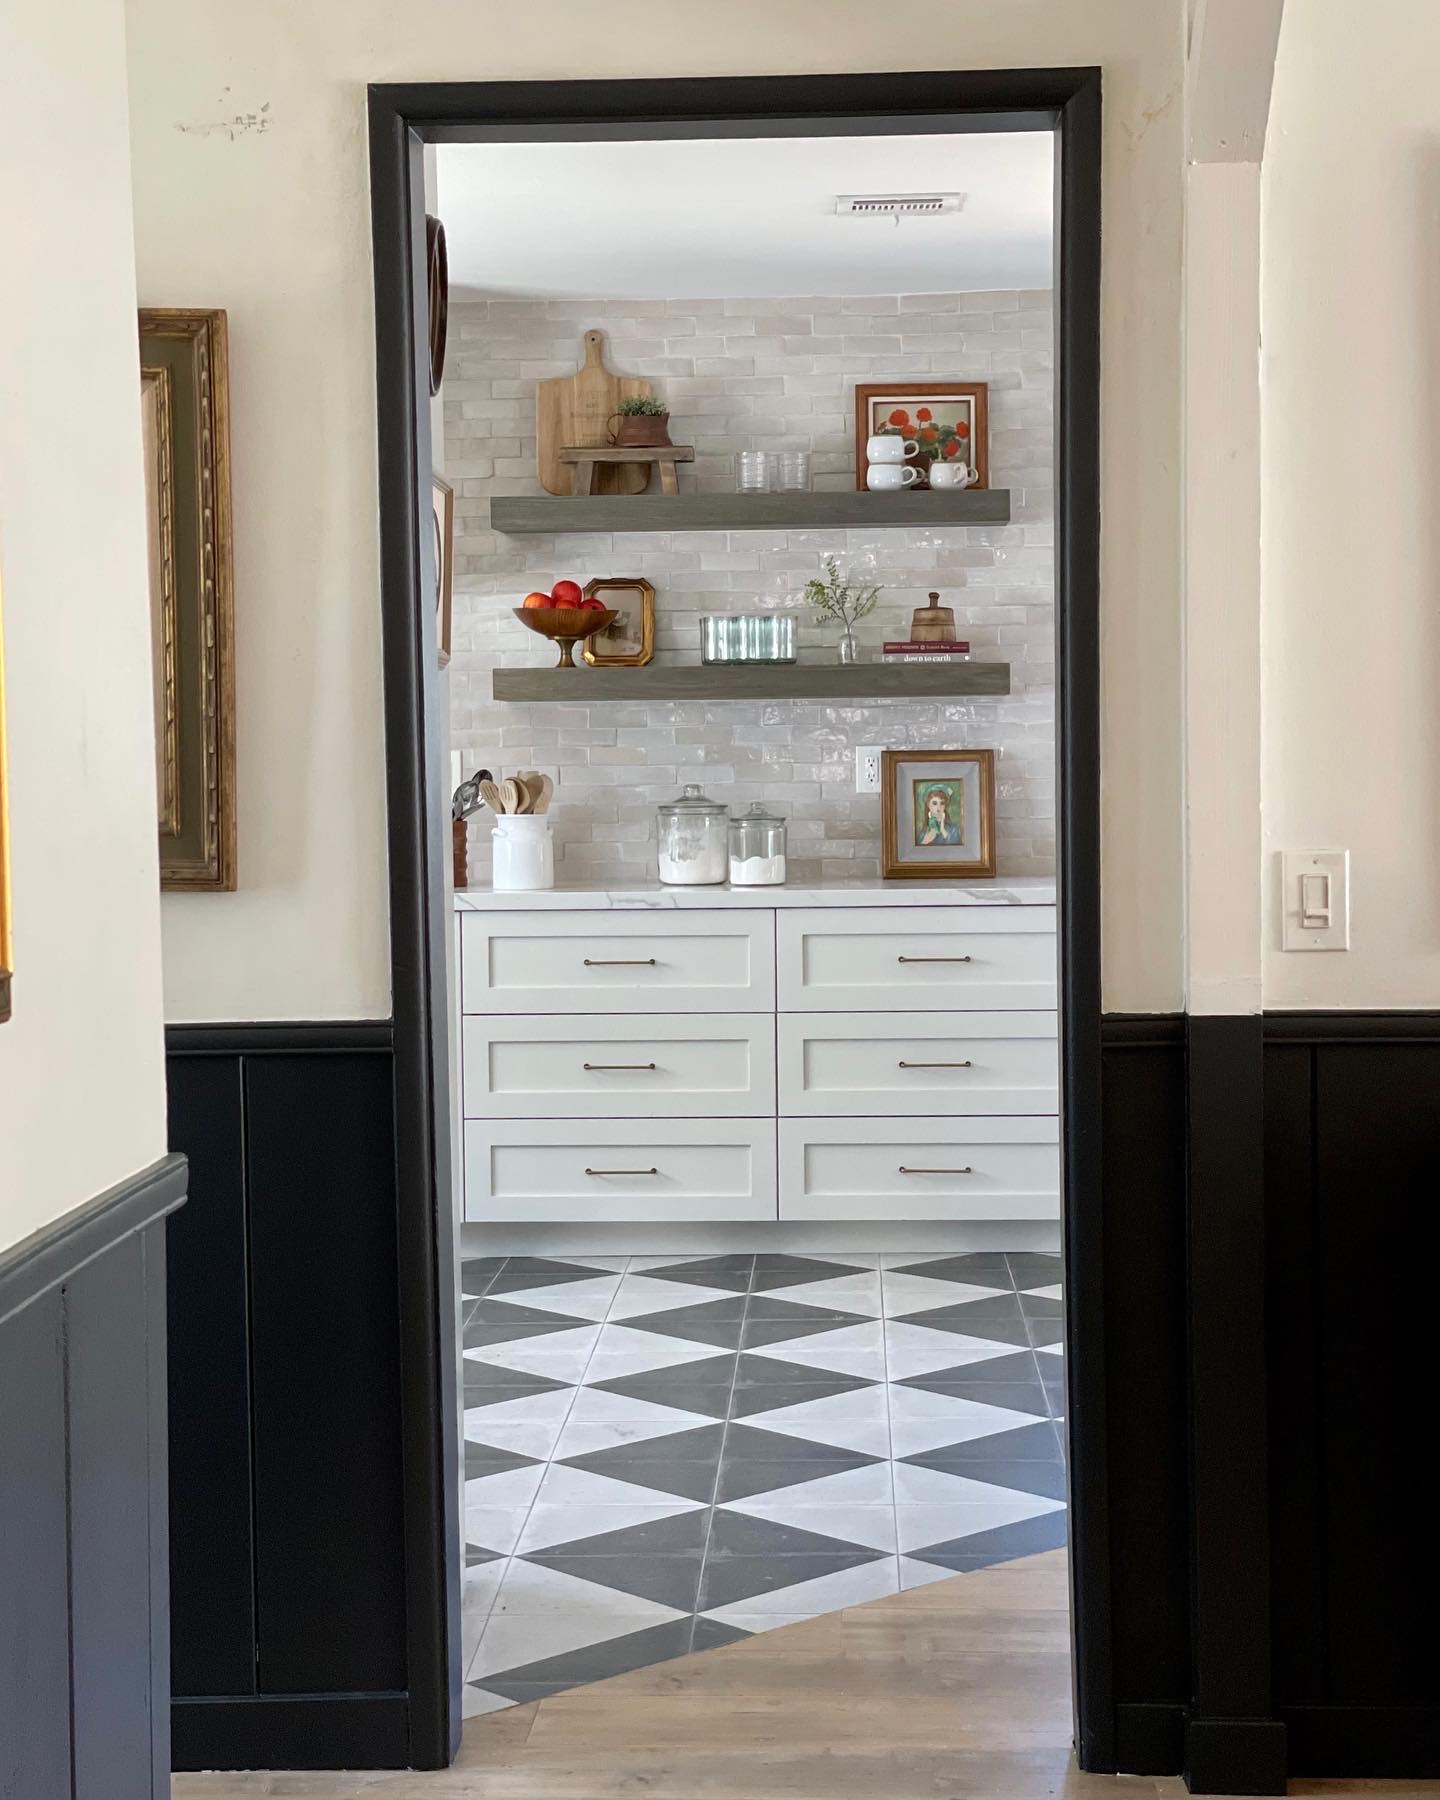 checkered floors, laminate wood floors, black wainscoting, mopboard black by benjamin moore, shiplap wainscoting, swiss coffee paint, modern farmhouse, art placement, modern traditional home, black paint colors, painted trim, painted wainscoting, kitchen floating shelves, styling floating shelves, paint transition